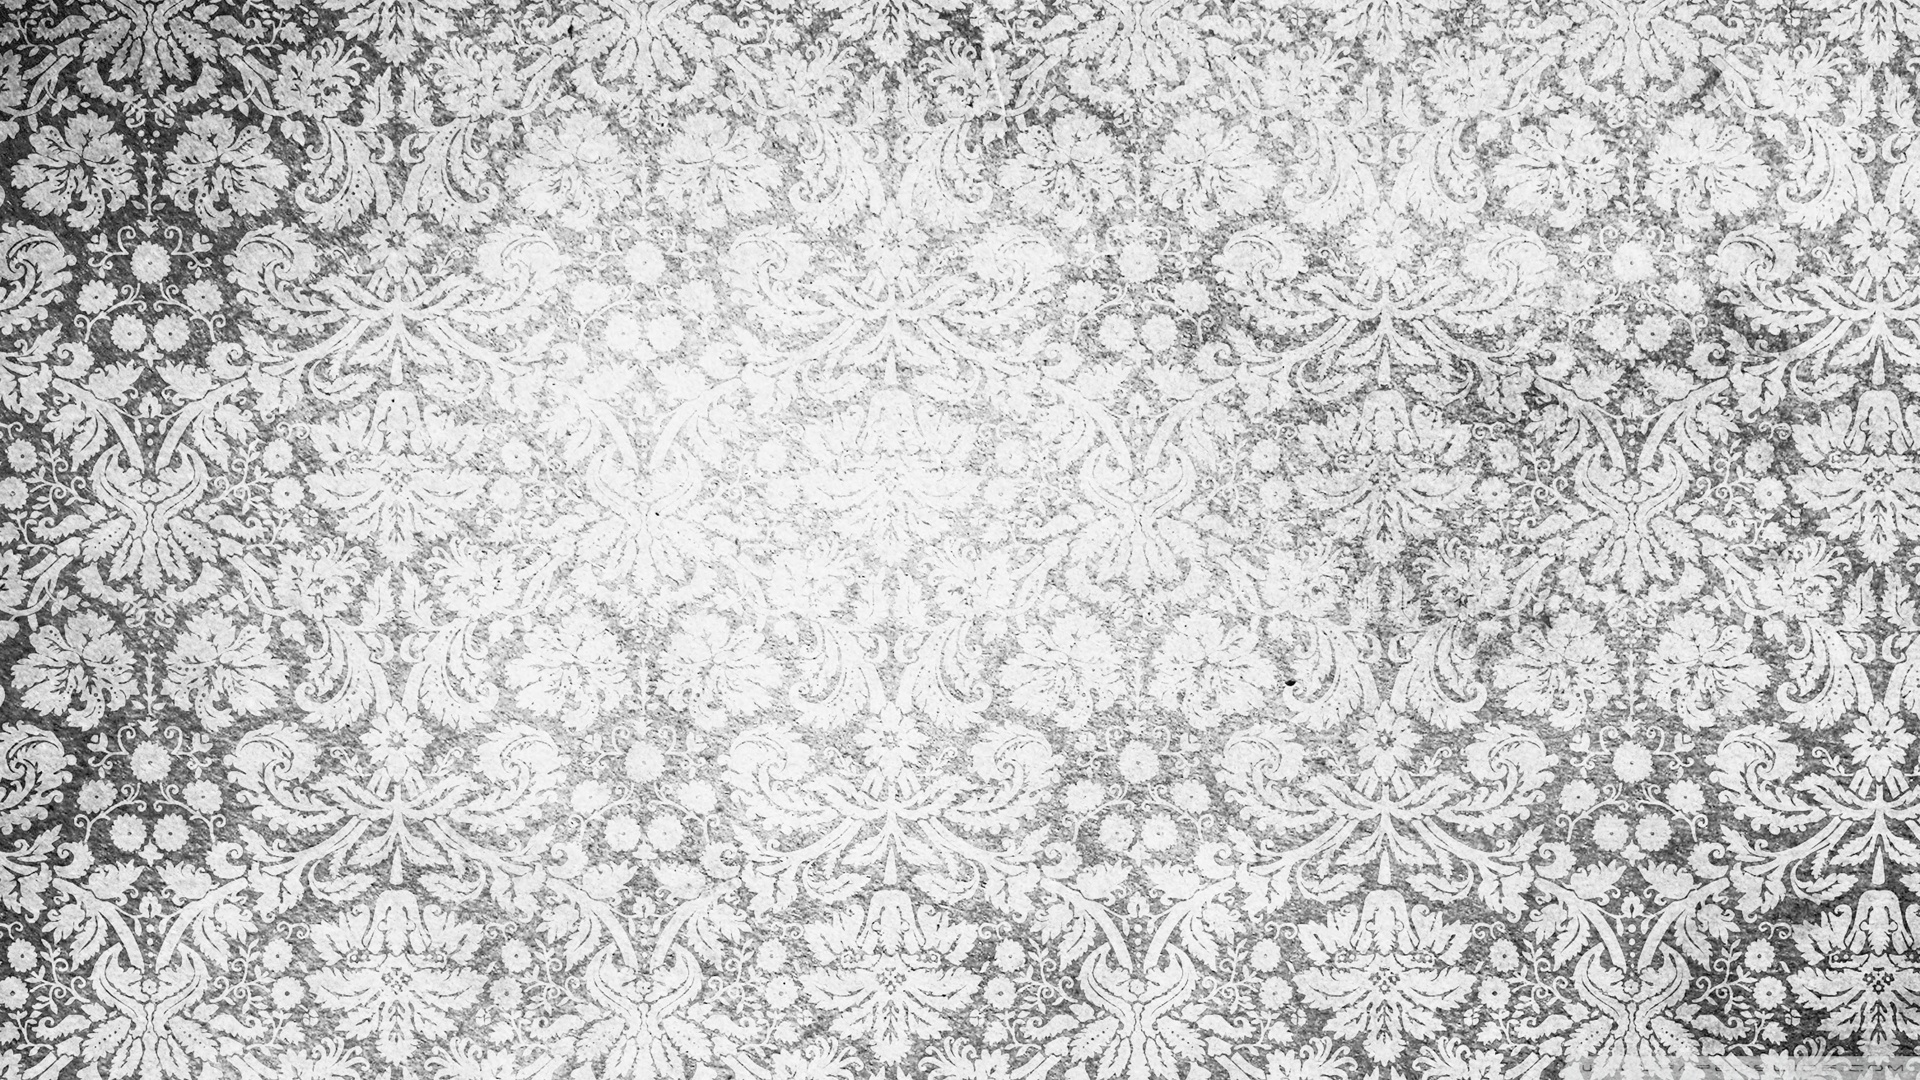  Black And White Wallpaper 1920x1080 Vintage Pattern Black And